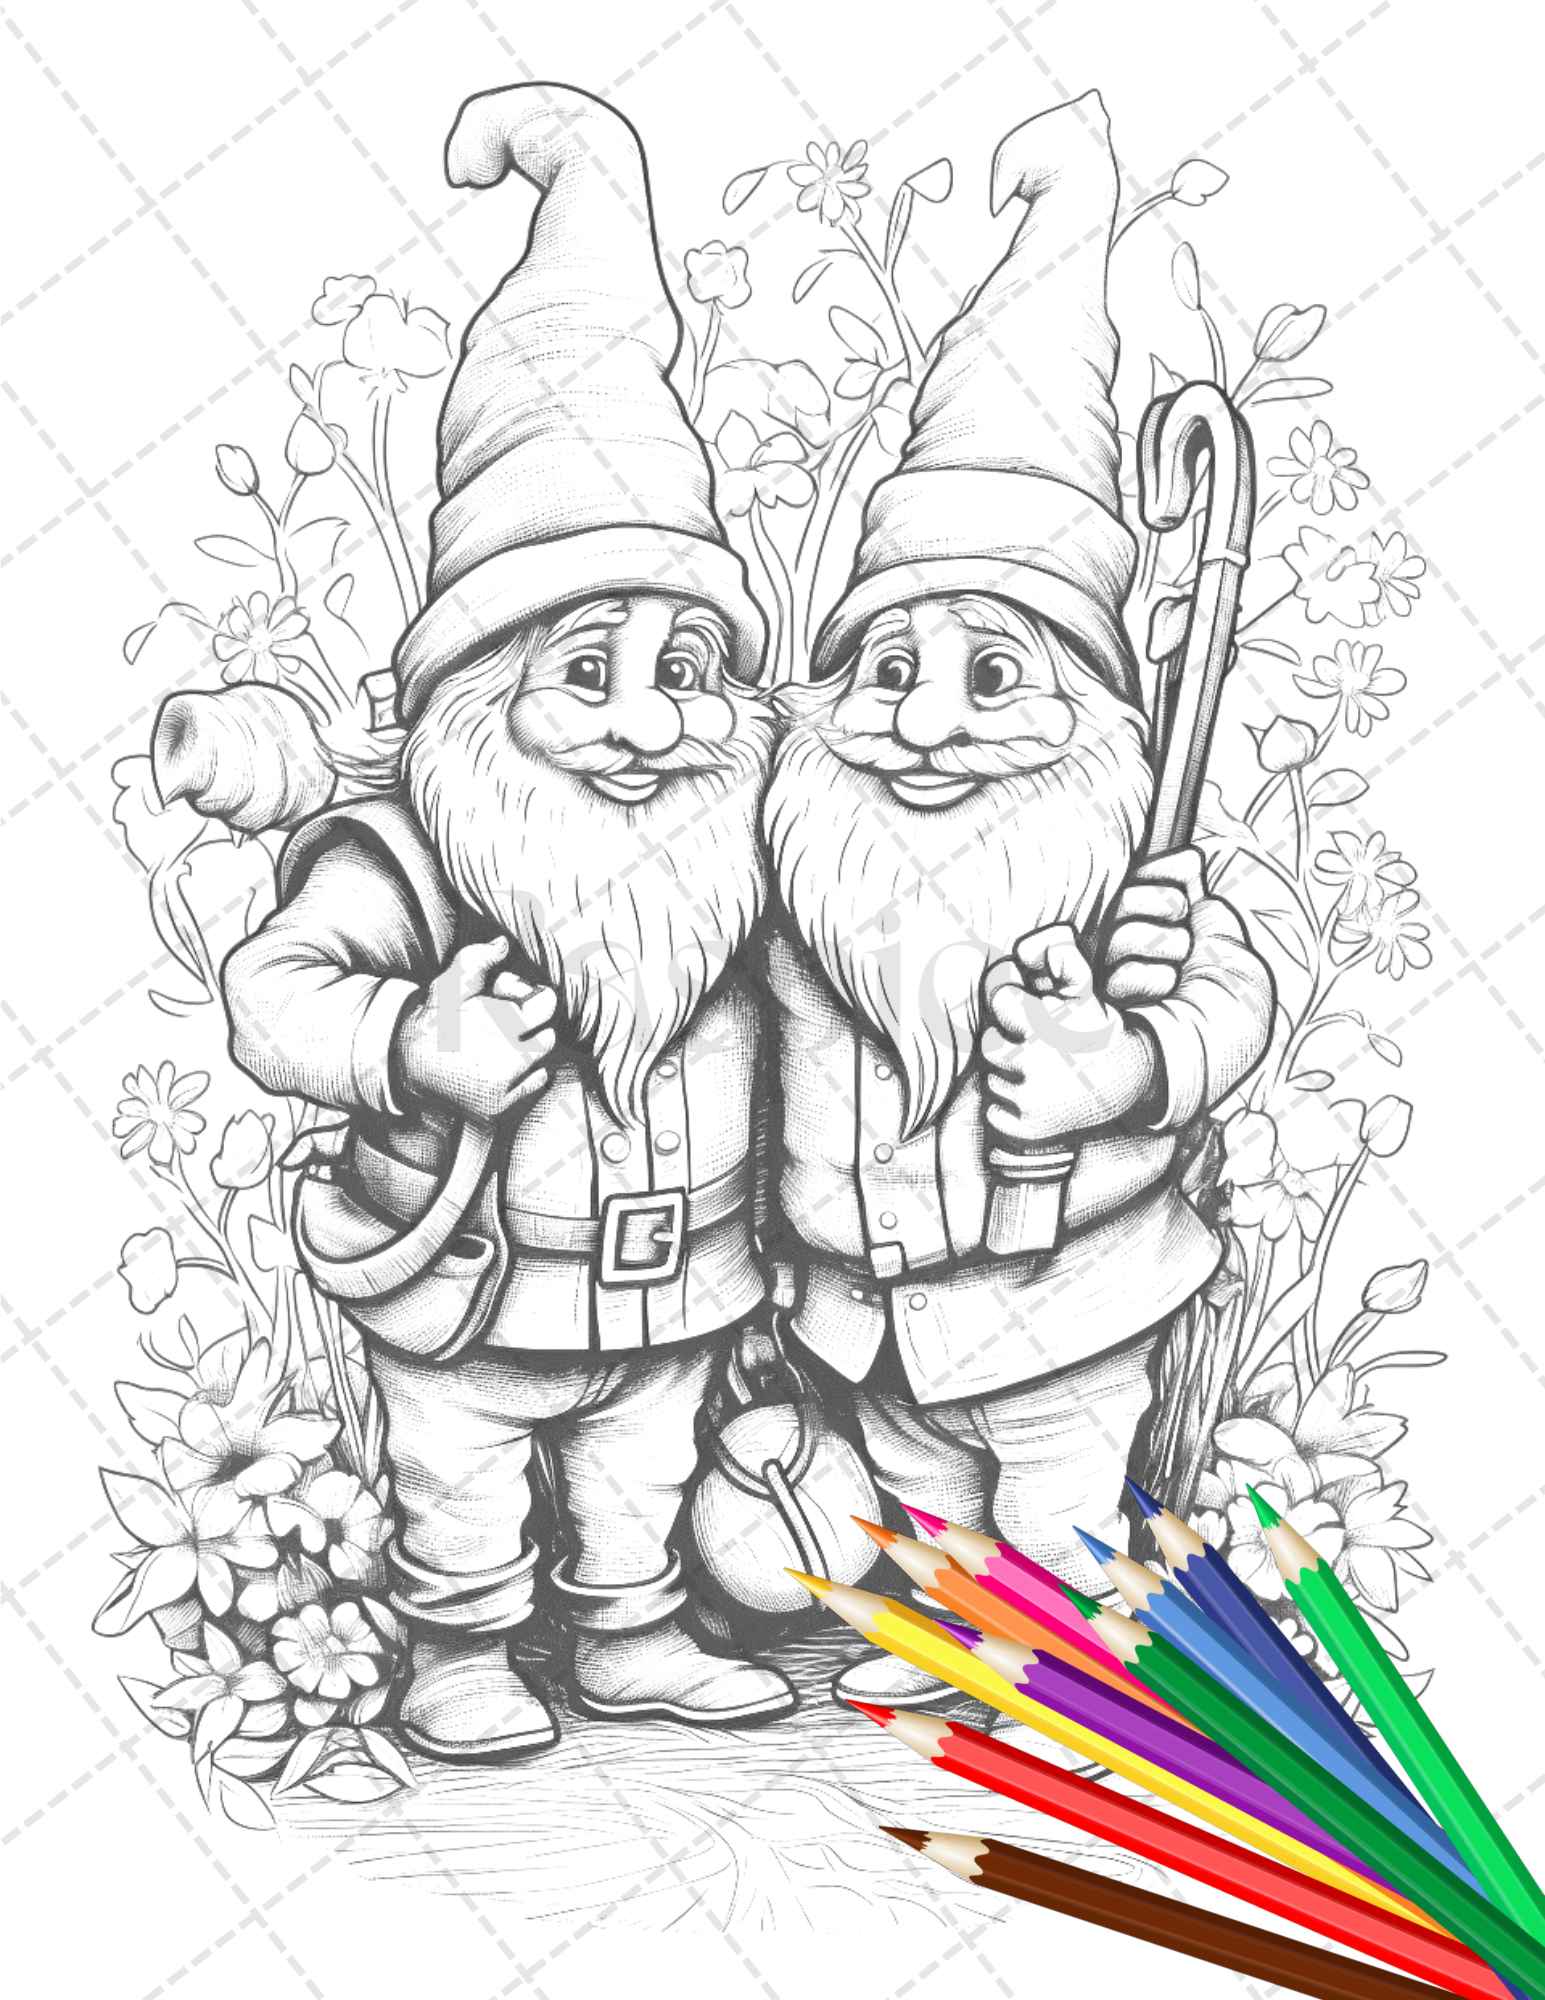 Gnome love coloring pages printable for adults grayscale coloring â coloring